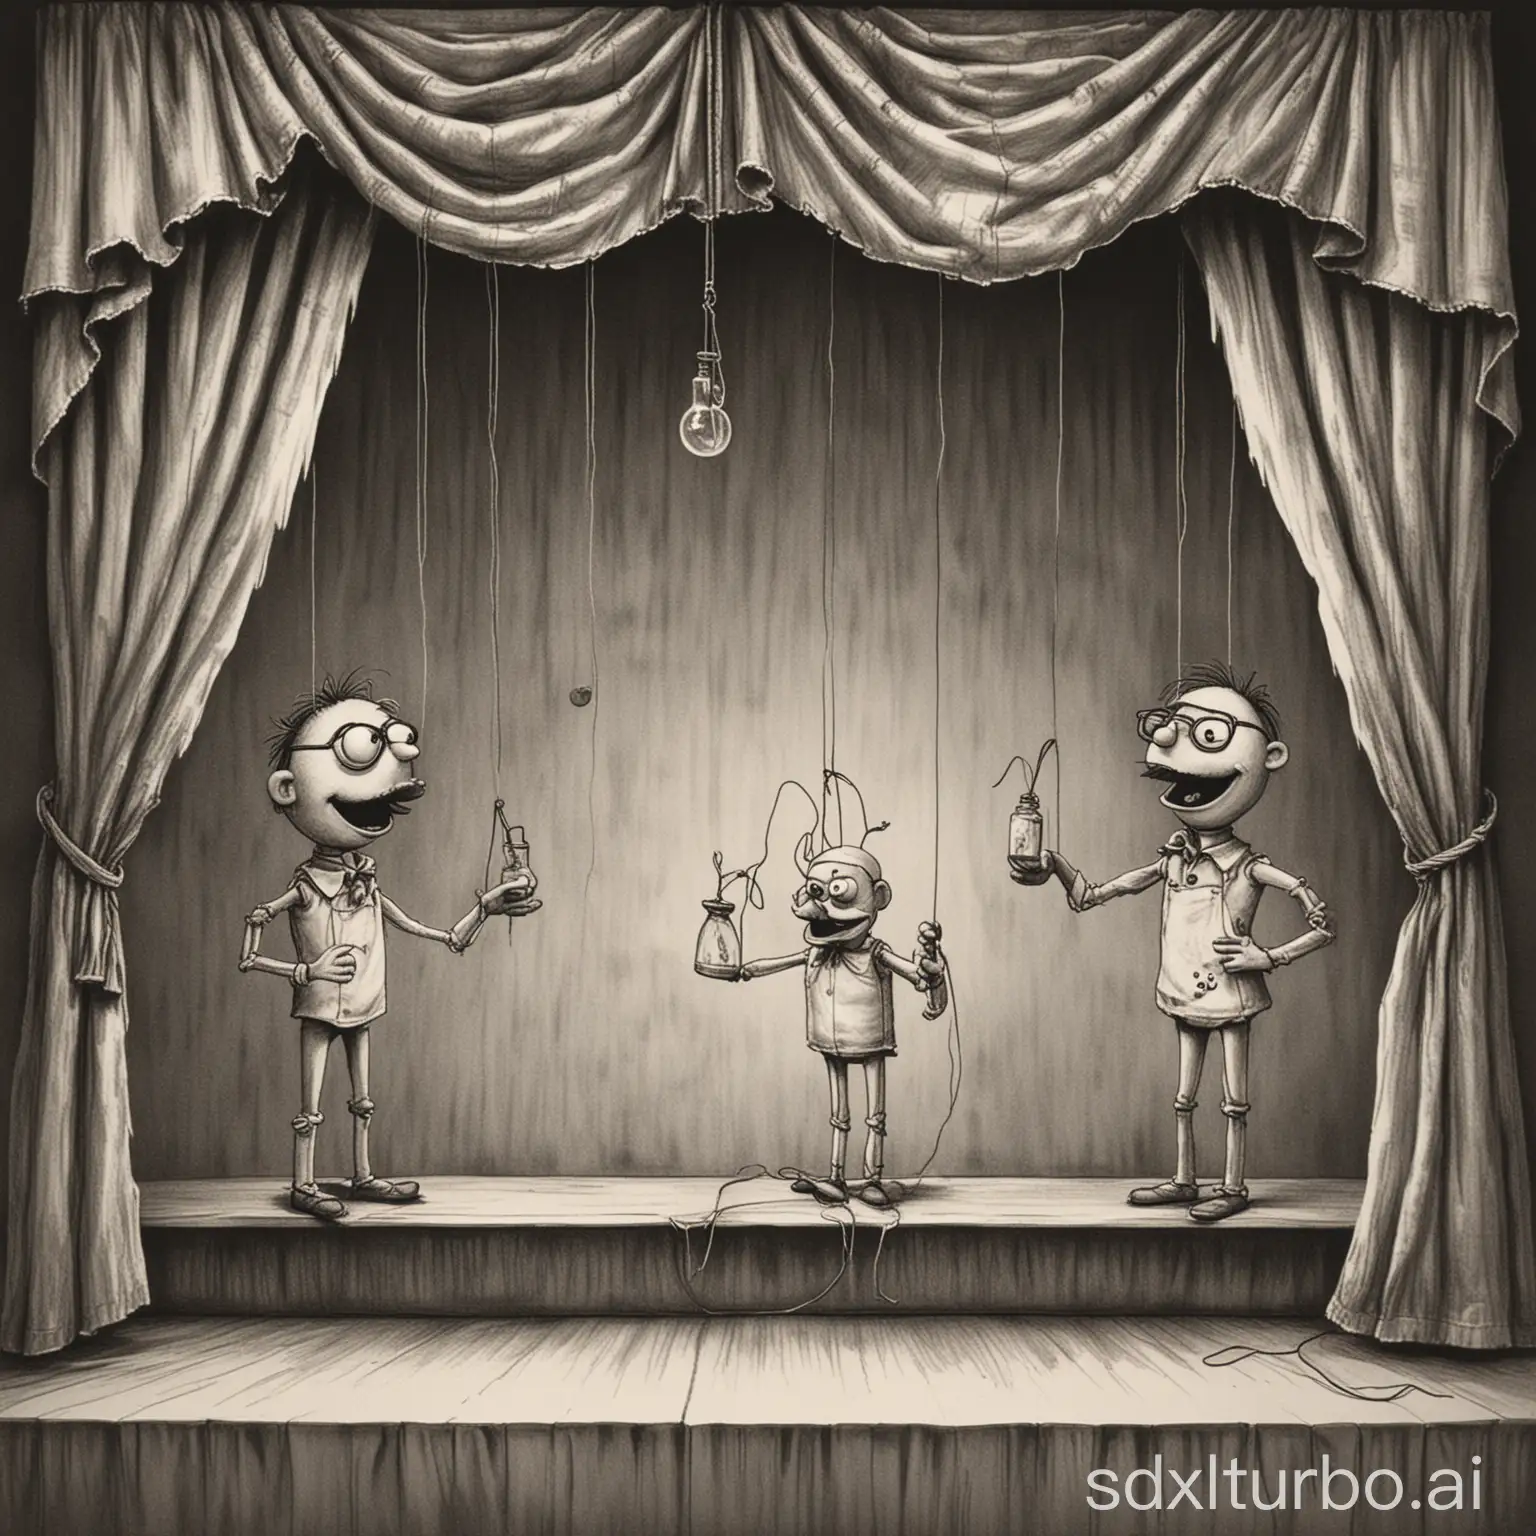 The entire drawing is a black and white sketch in the form of an animated drawing. A curtain from a puppet theater with two men on the left and right of the curtain. There are two puppets on the stage - one puppet represents the nitrogen atom, the other puppet represents the oxygen atom. Between the pupets there is an electron, which is also on strings and can be moved between puppets with a string. One man holds a computer in one hand and a link to control the puppet in the other. The second man holds a chemical flask in one hand and the ropes that control the puppets on stage in the other.